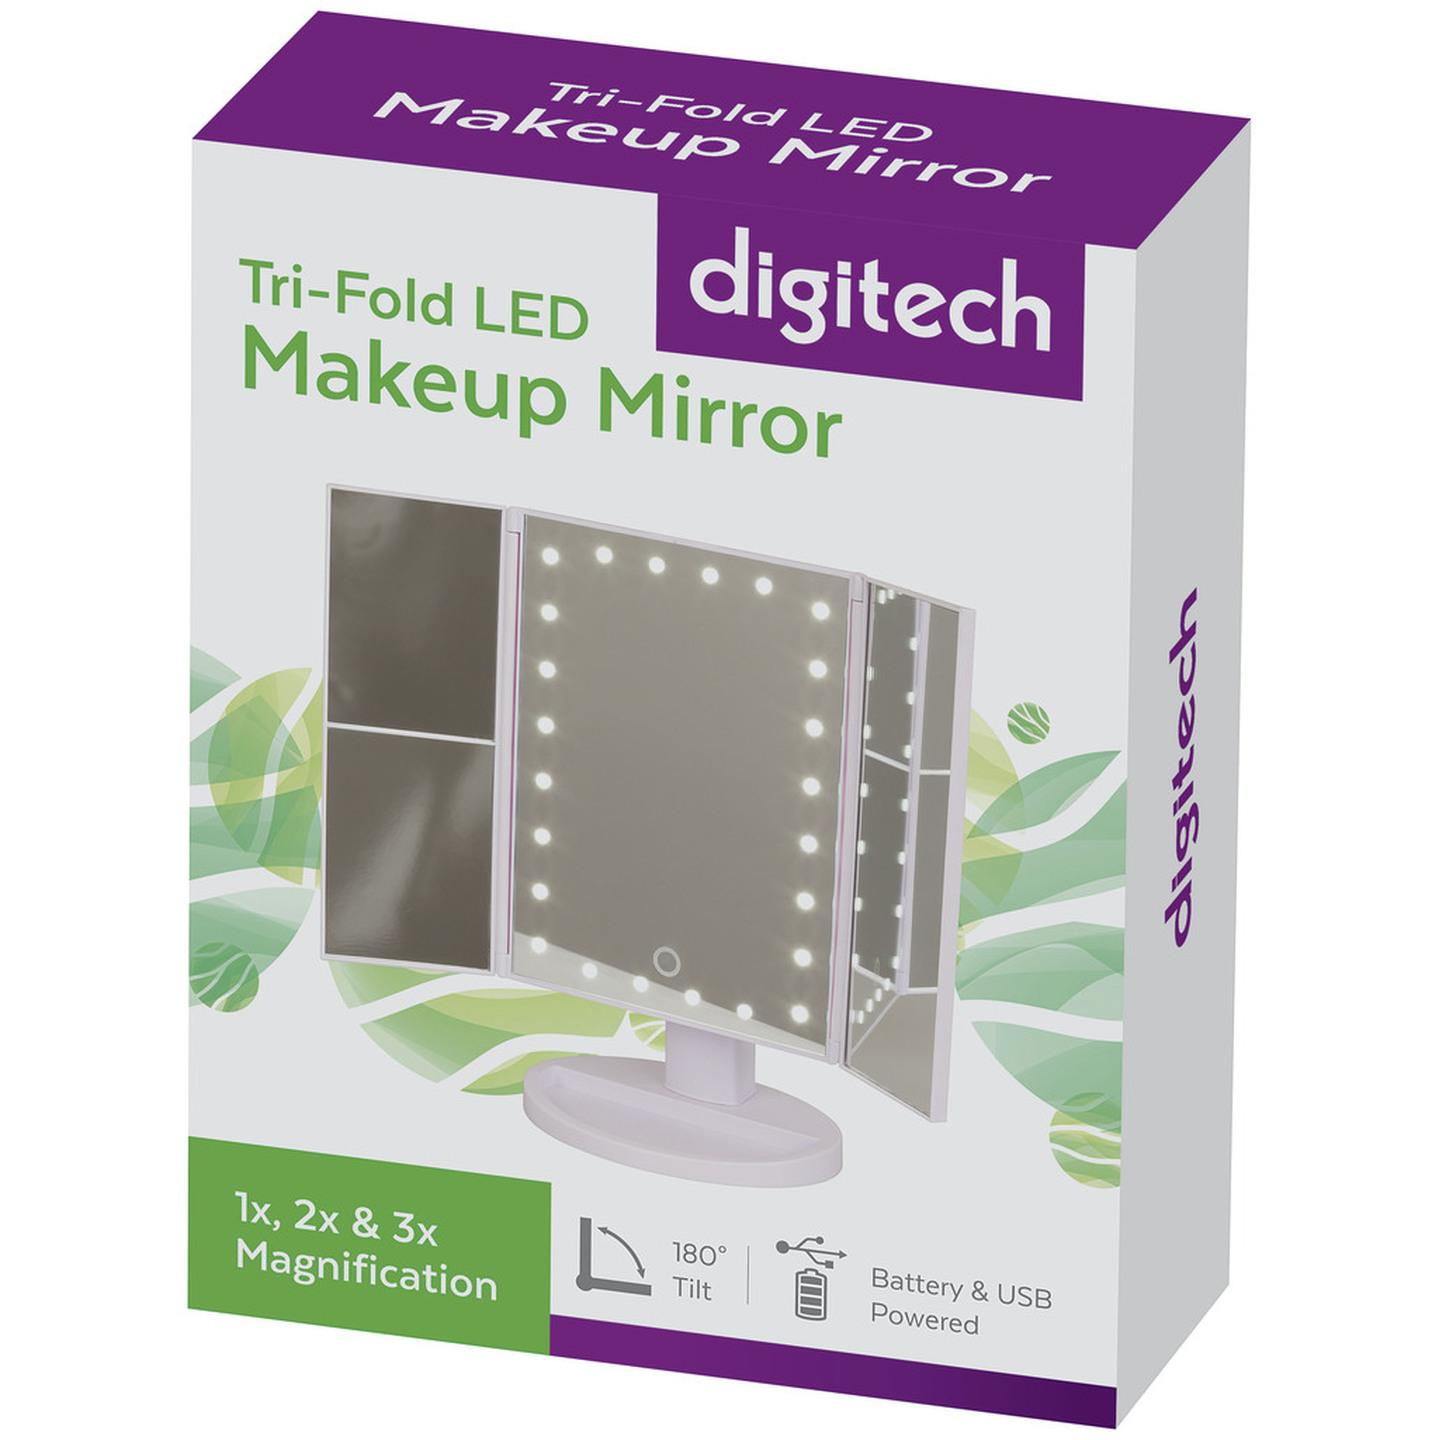 Tri-Fold LED Makeup Mirror with 3 x Magnification